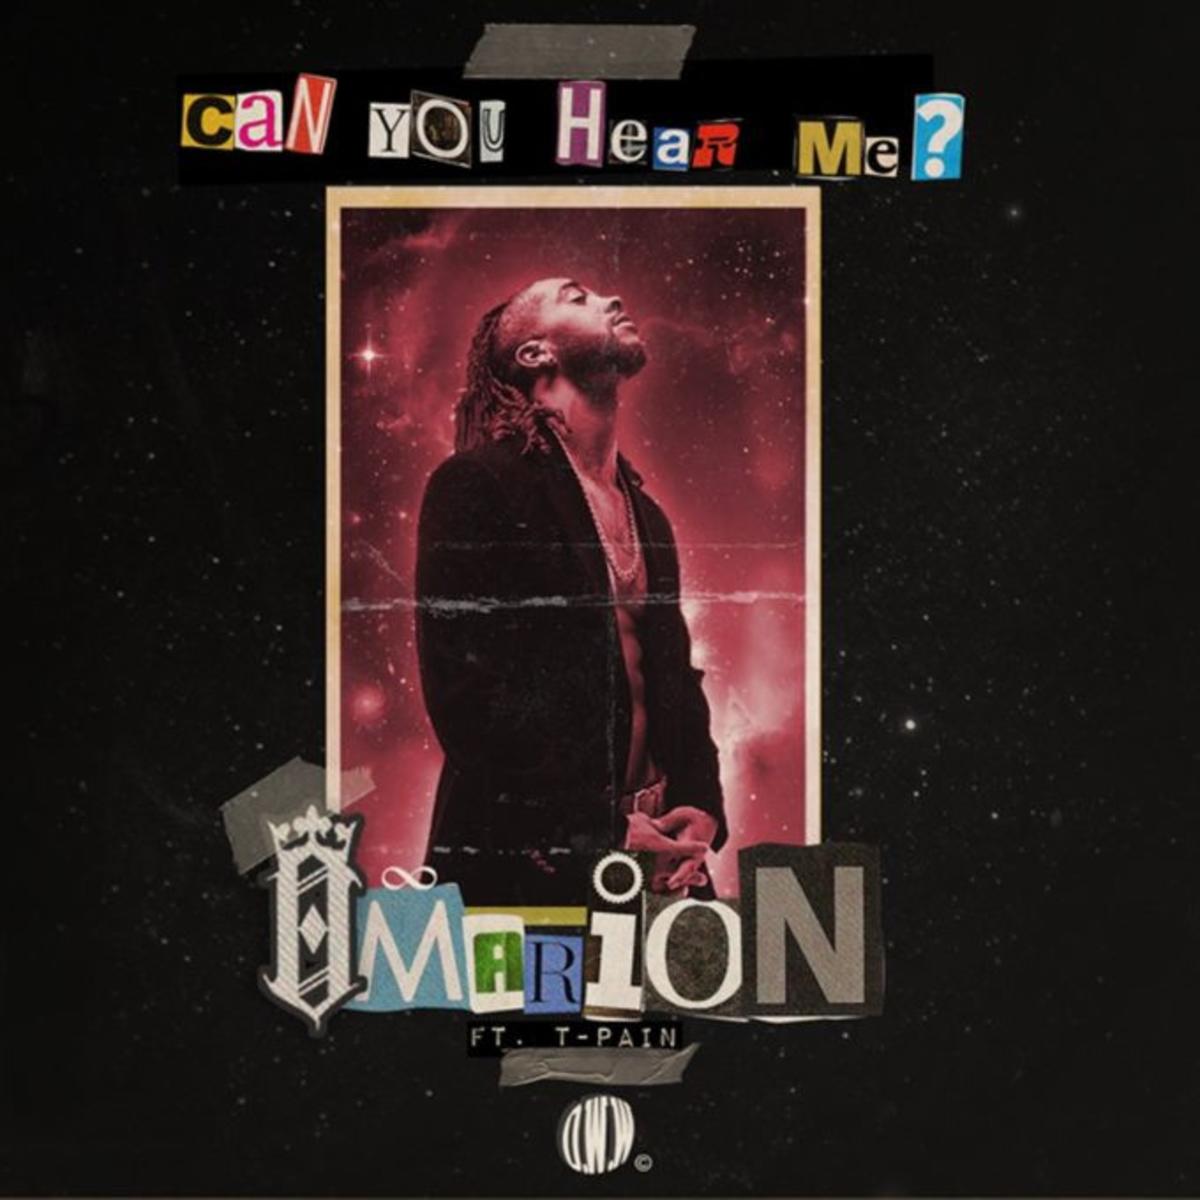 Omarion Returns With The T-Pain-Assisted “Can You Hear Me”